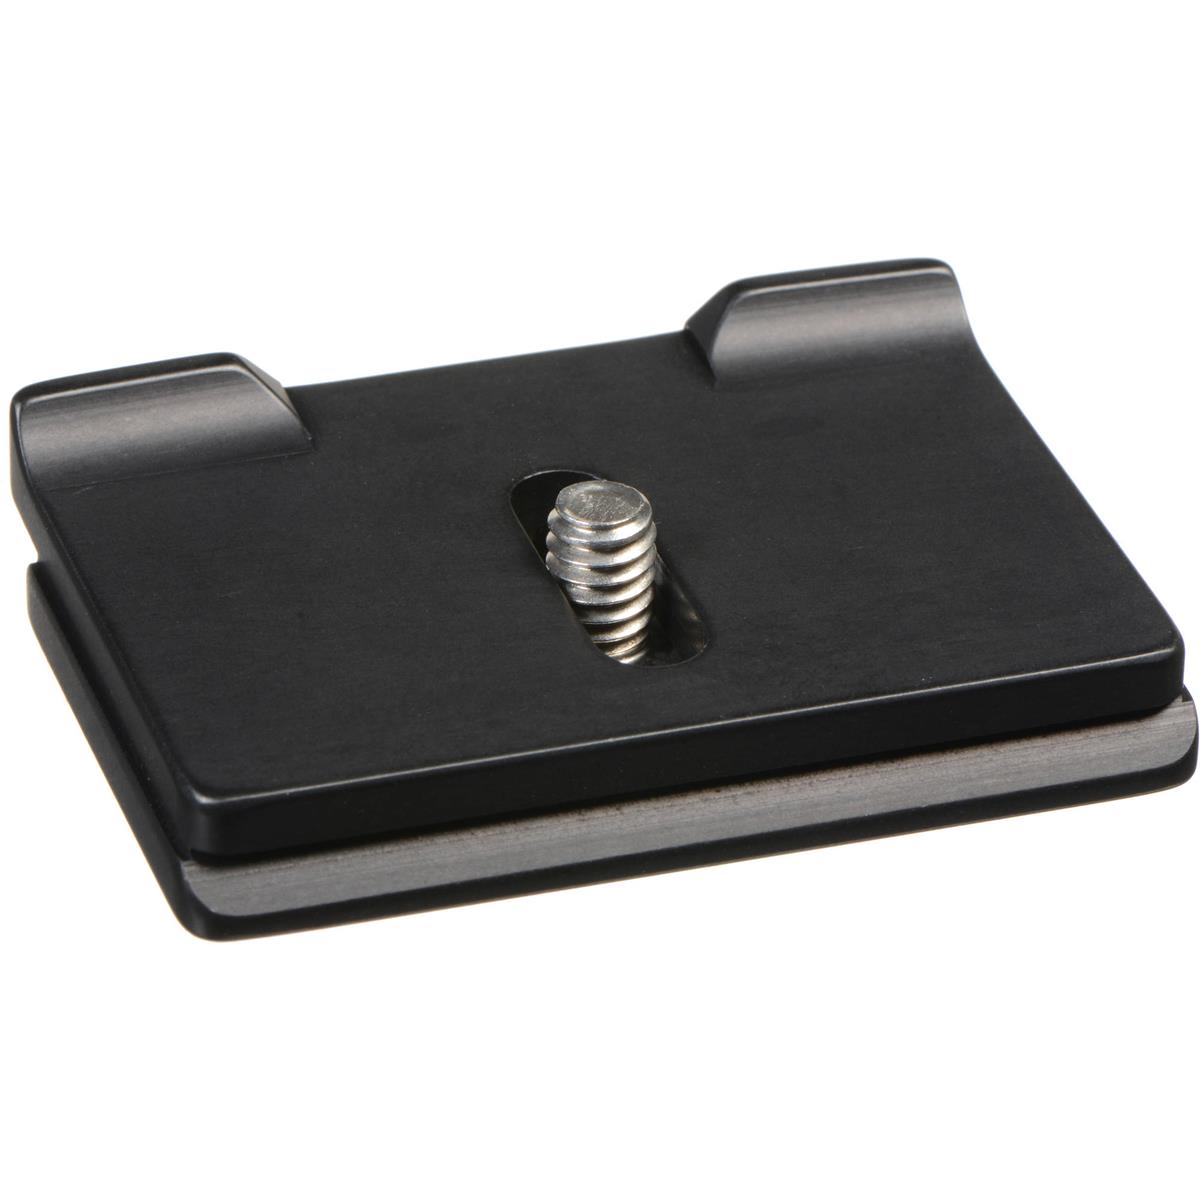 Image of Acratech 2167 Quick Release Plate for Nikon D300